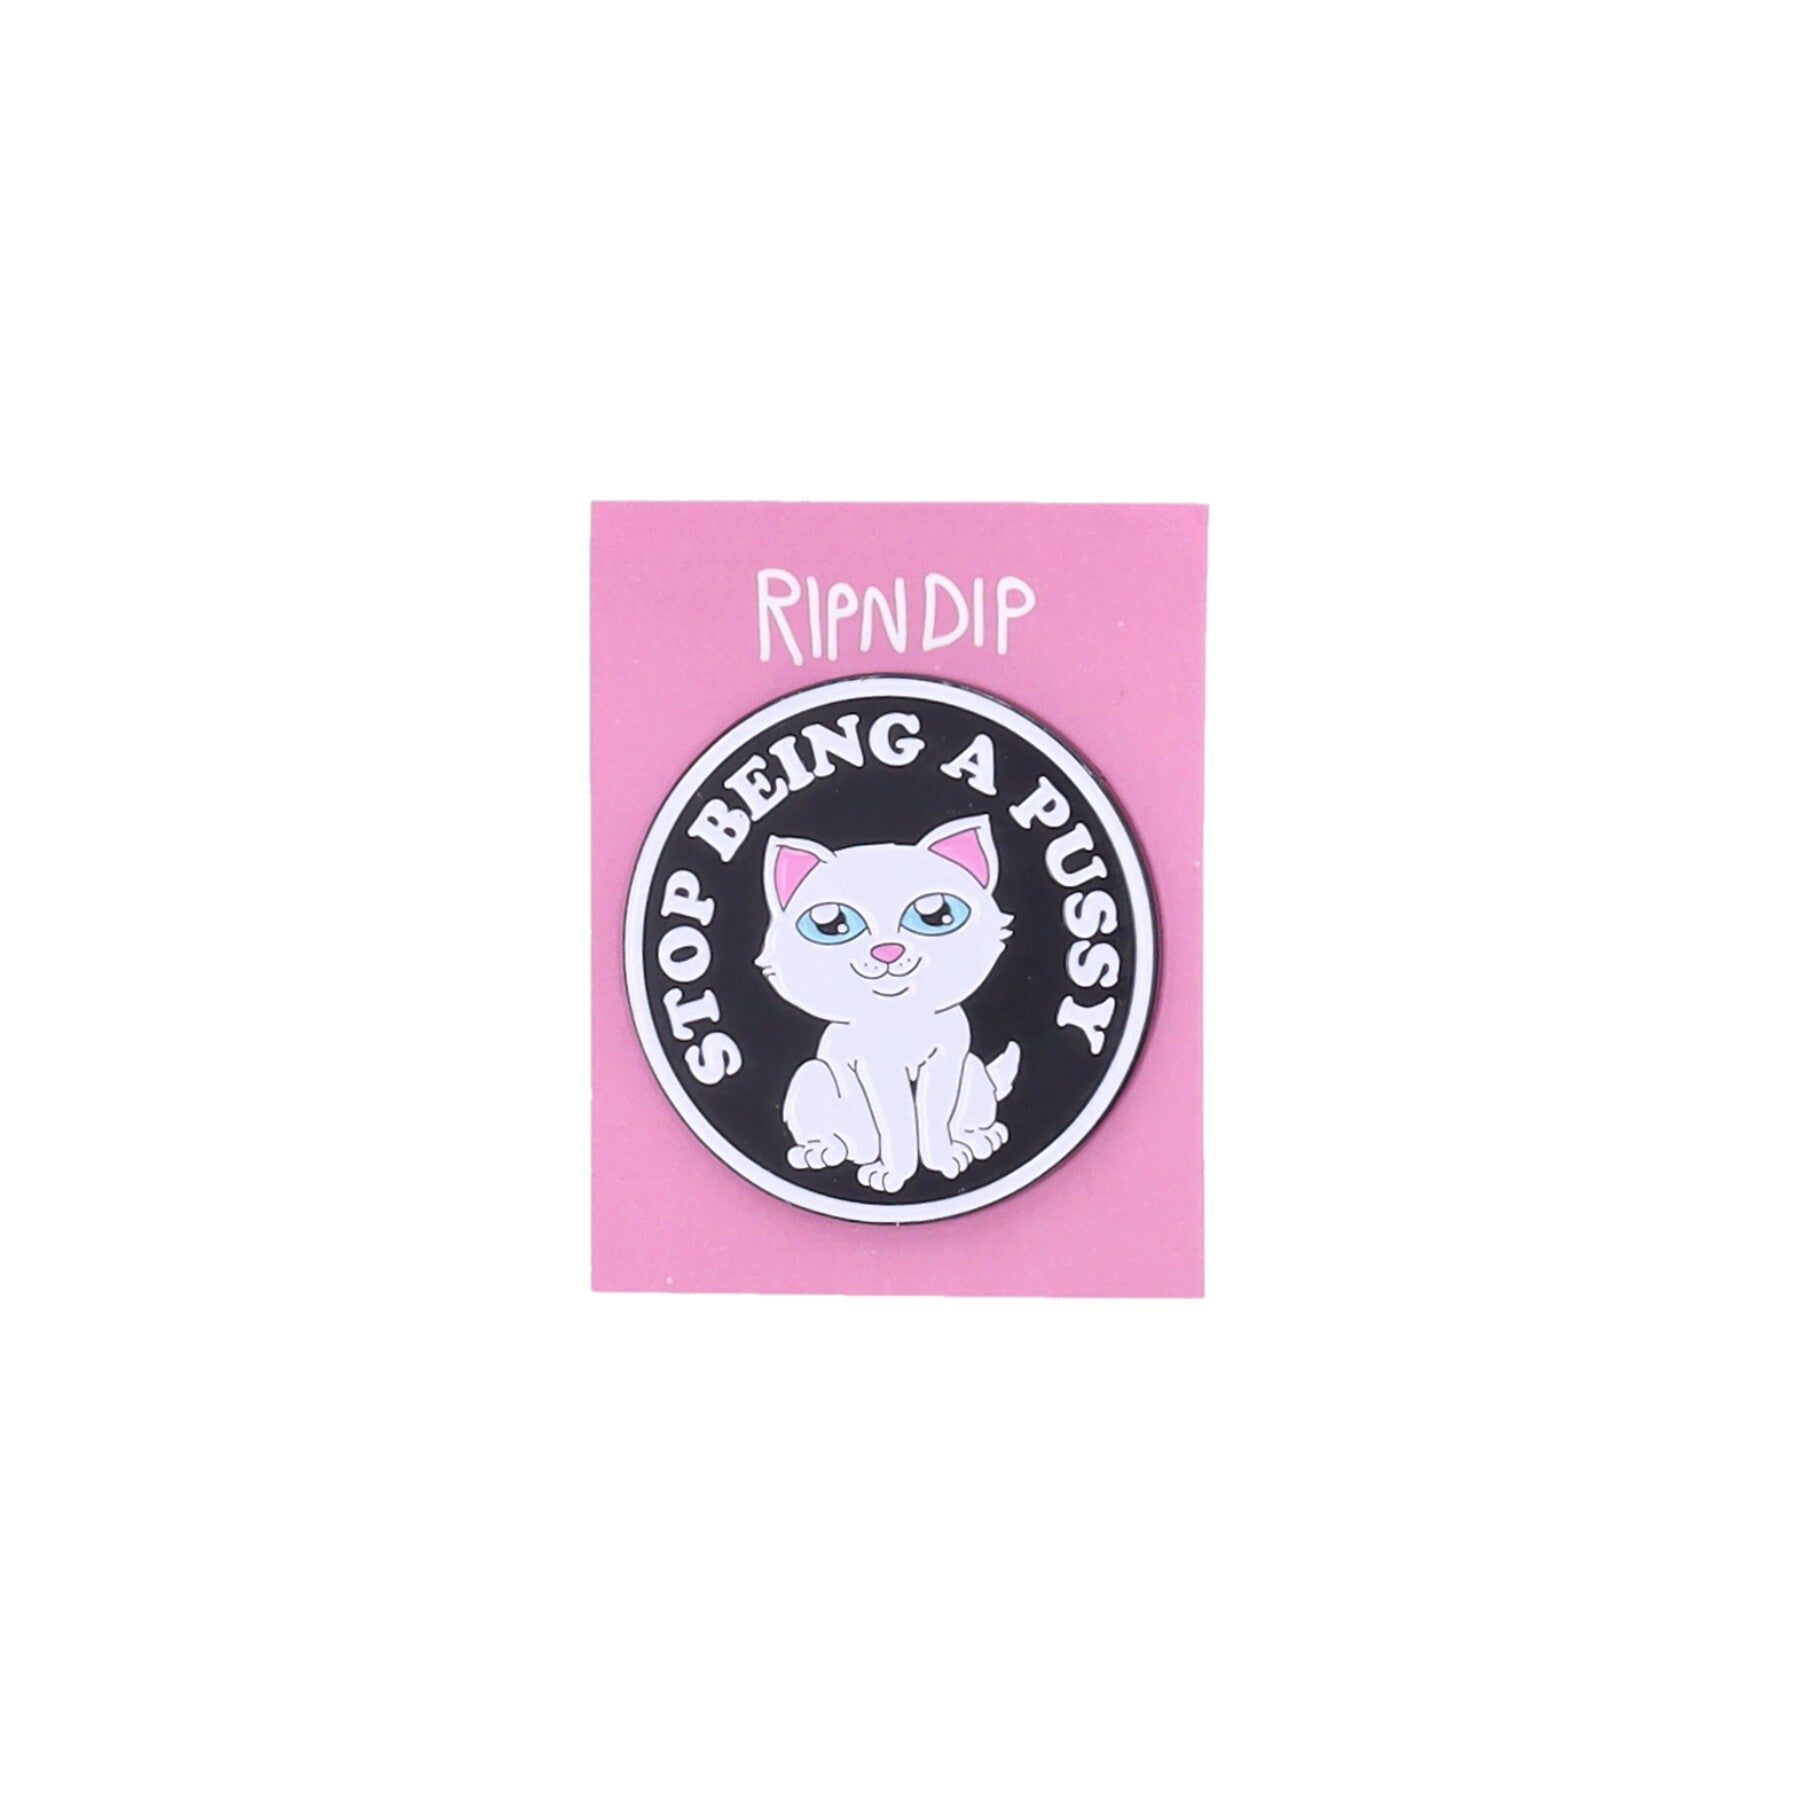 Men's Stop Being A Pussy Pin Brooch